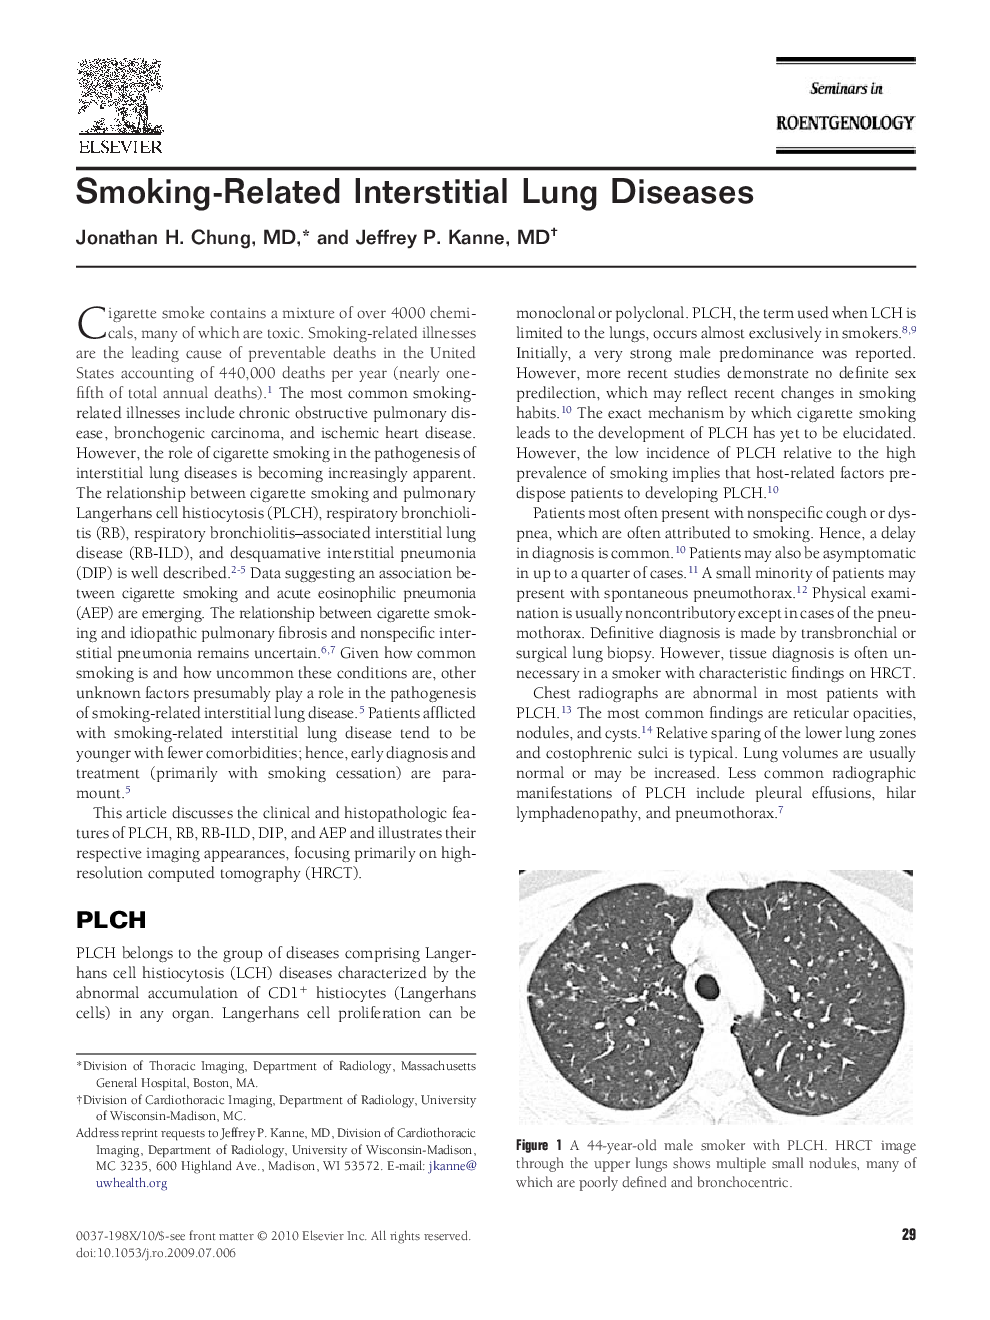 Smoking-Related Interstitial Lung Diseases